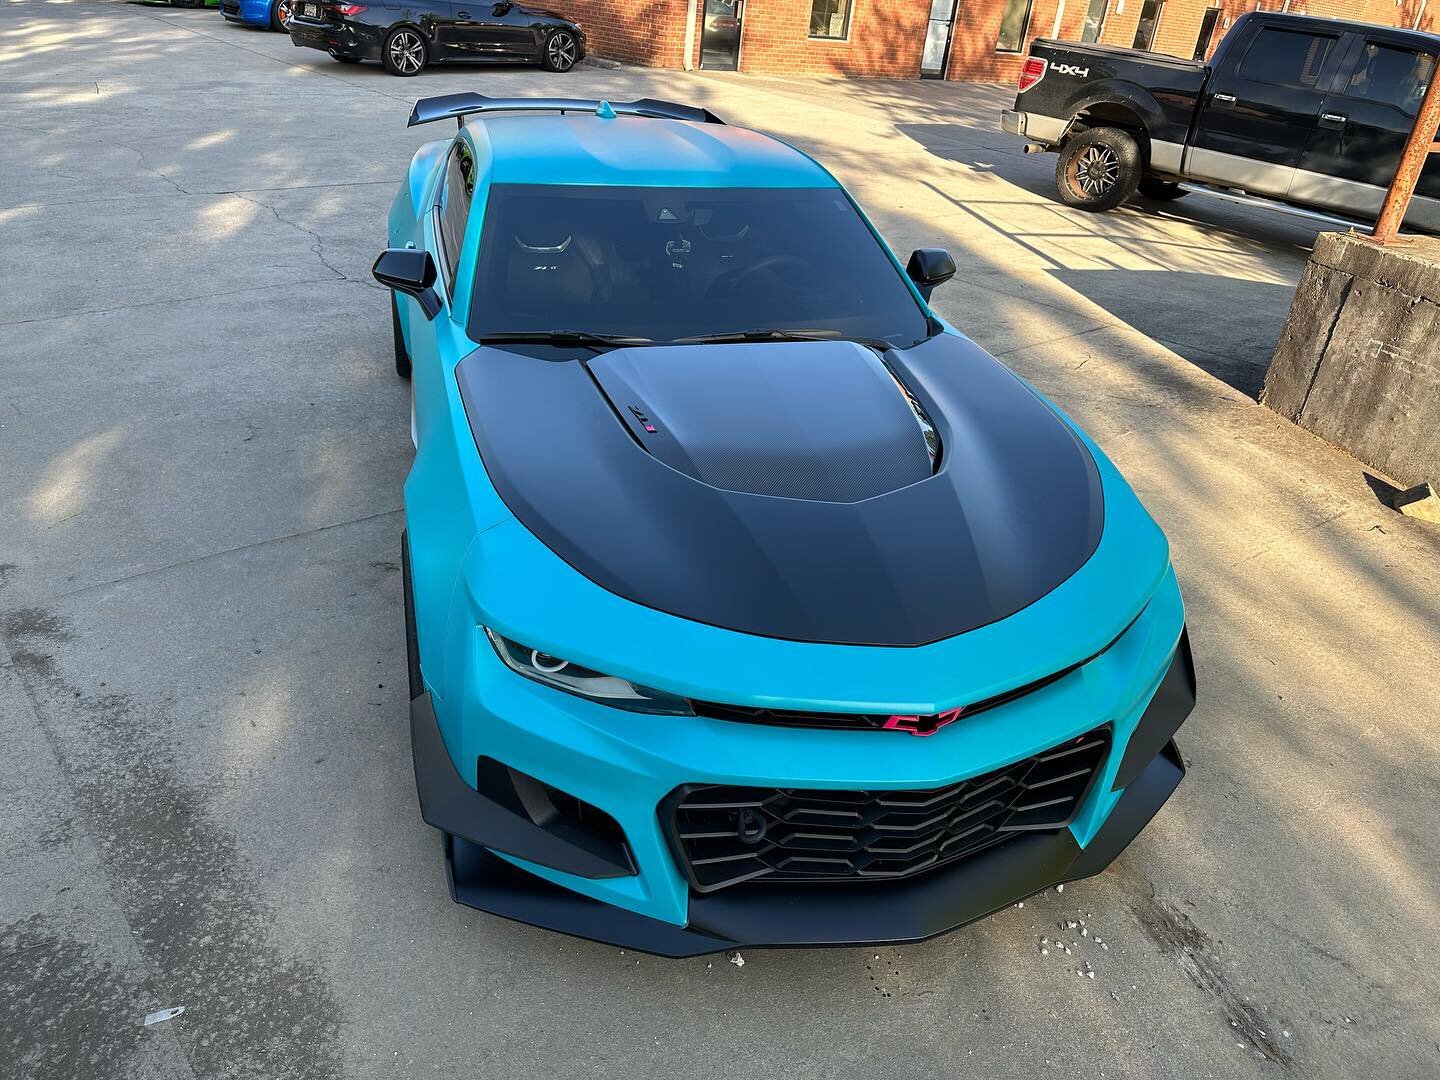 More #matteturquoise please! This time on a #chevyzl1